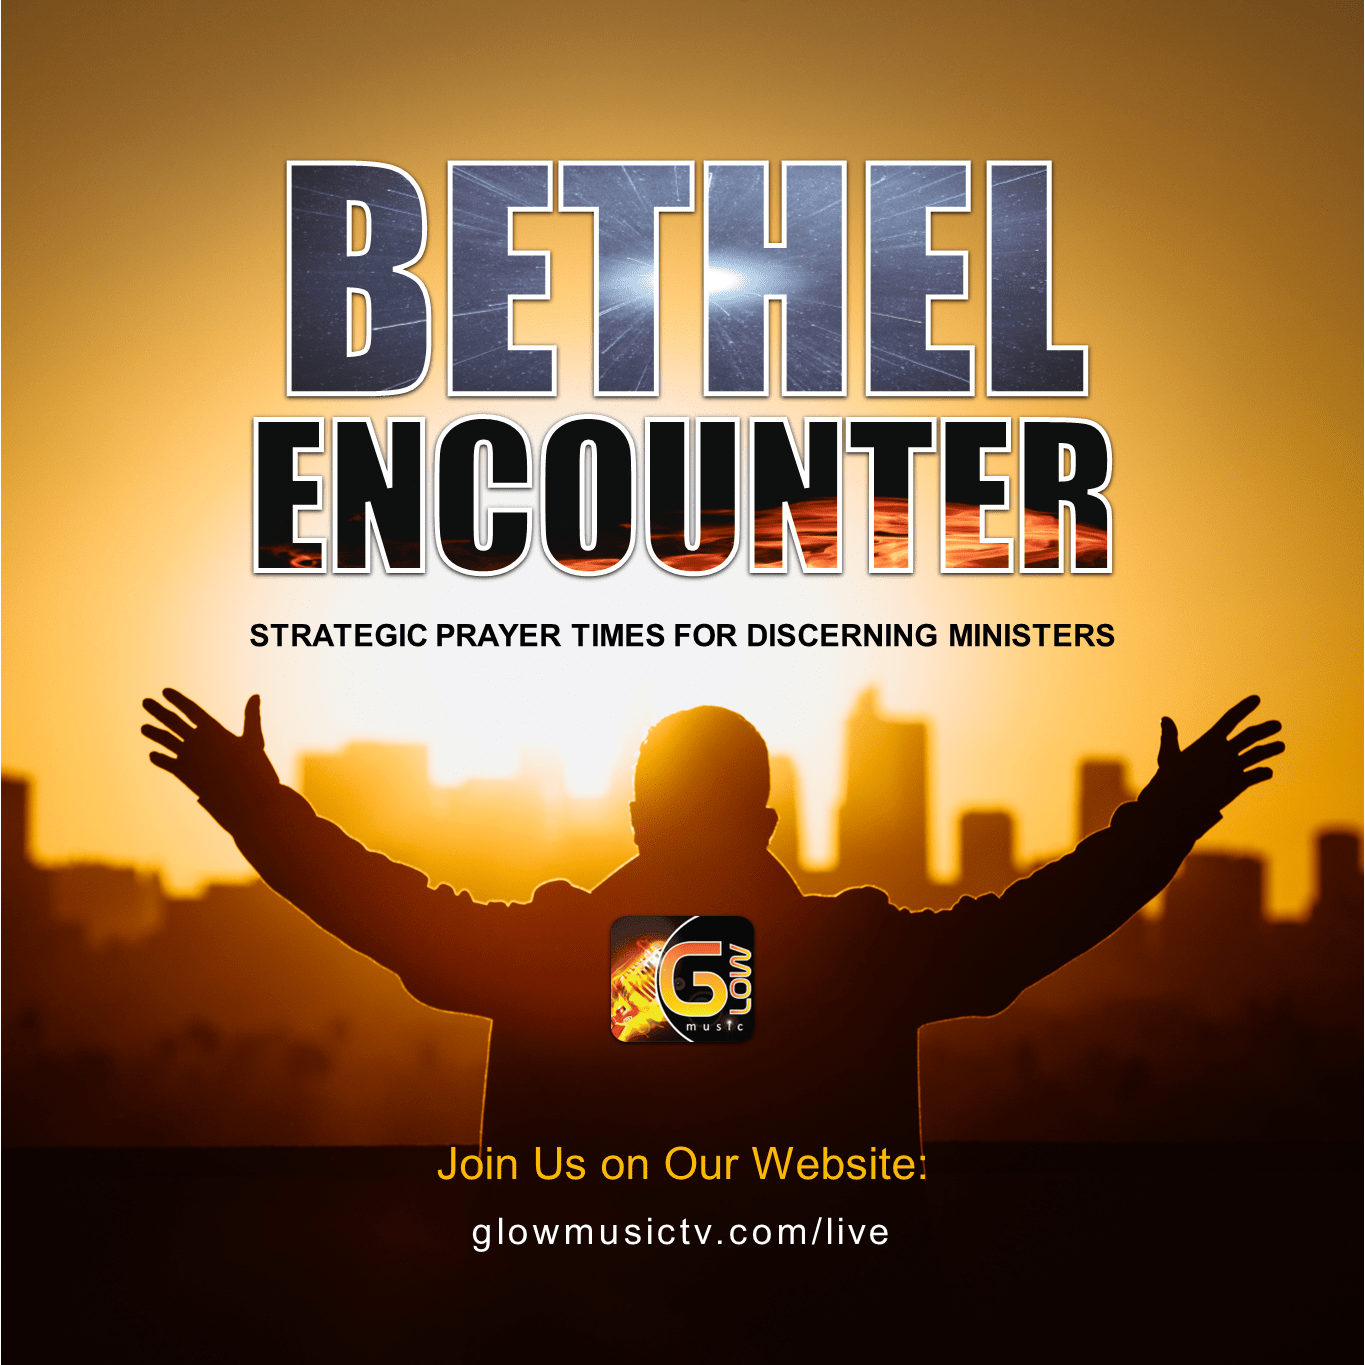 Bethel Encounter by Glow Music Ministry